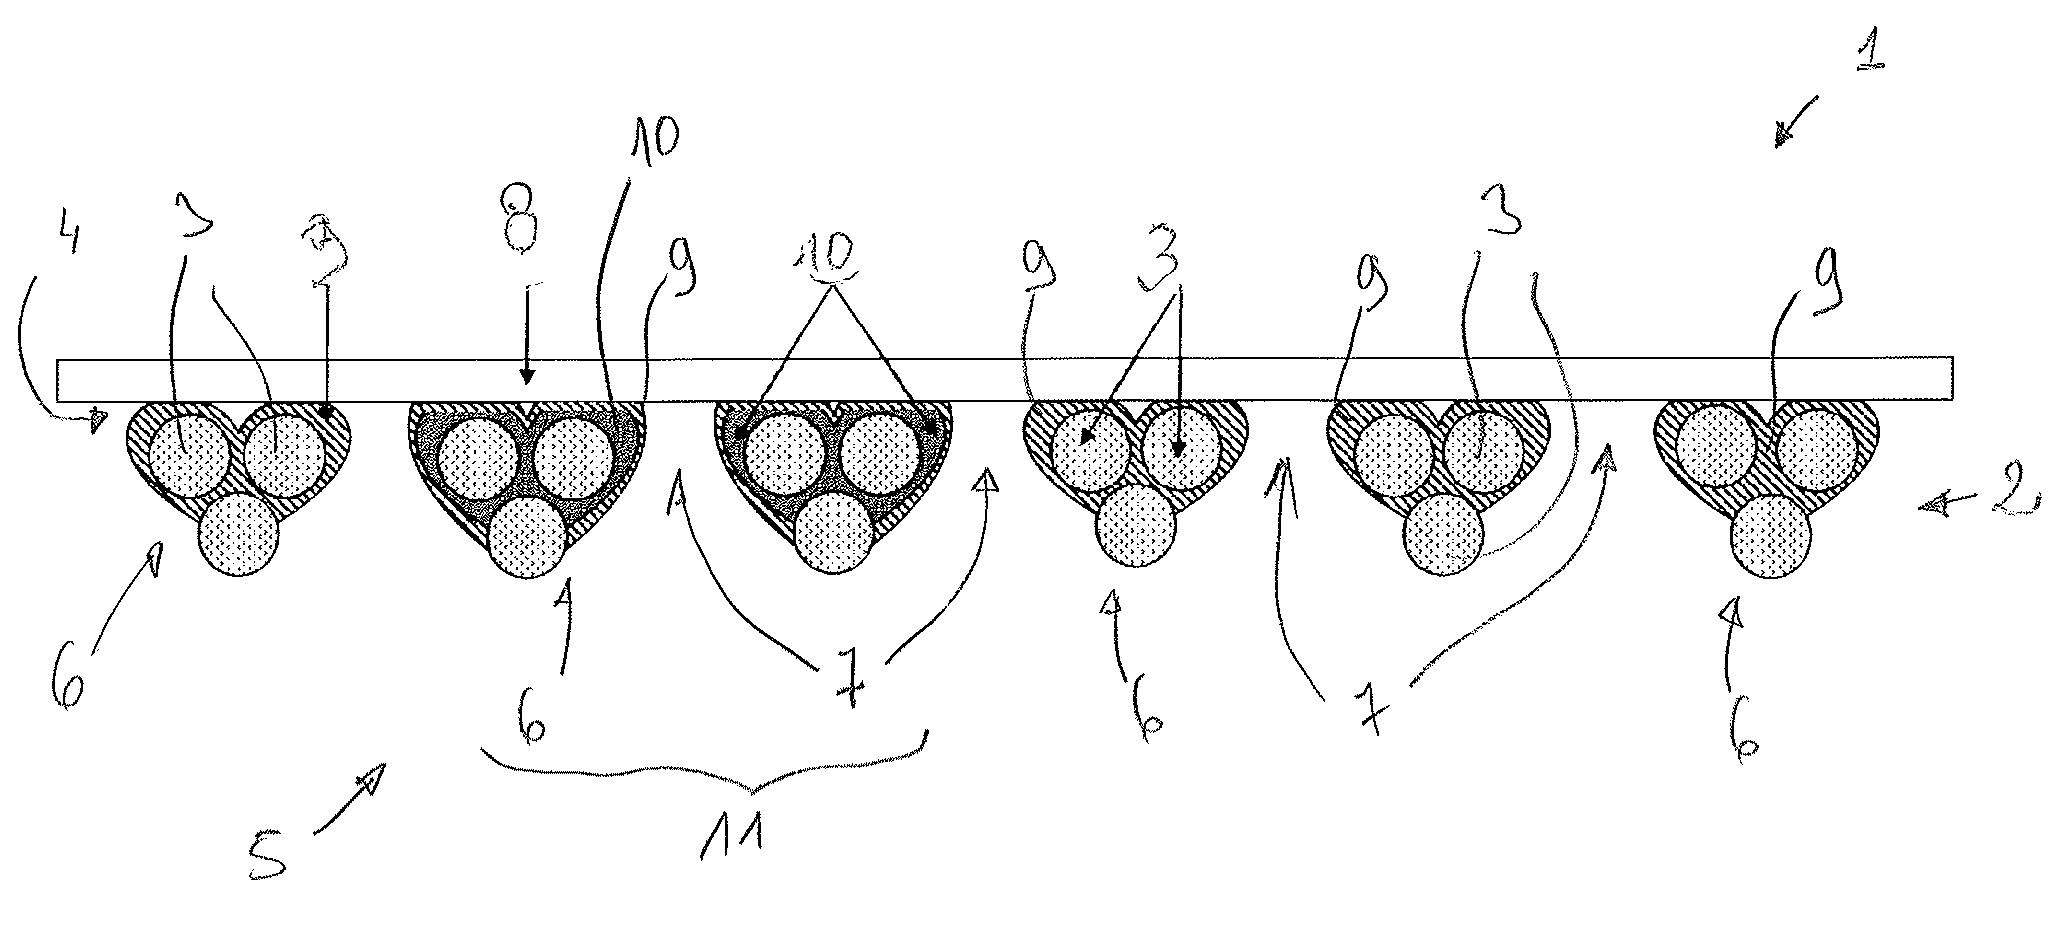 Synthetic prosthesis comprising a knit and a non porous film and method for forming same